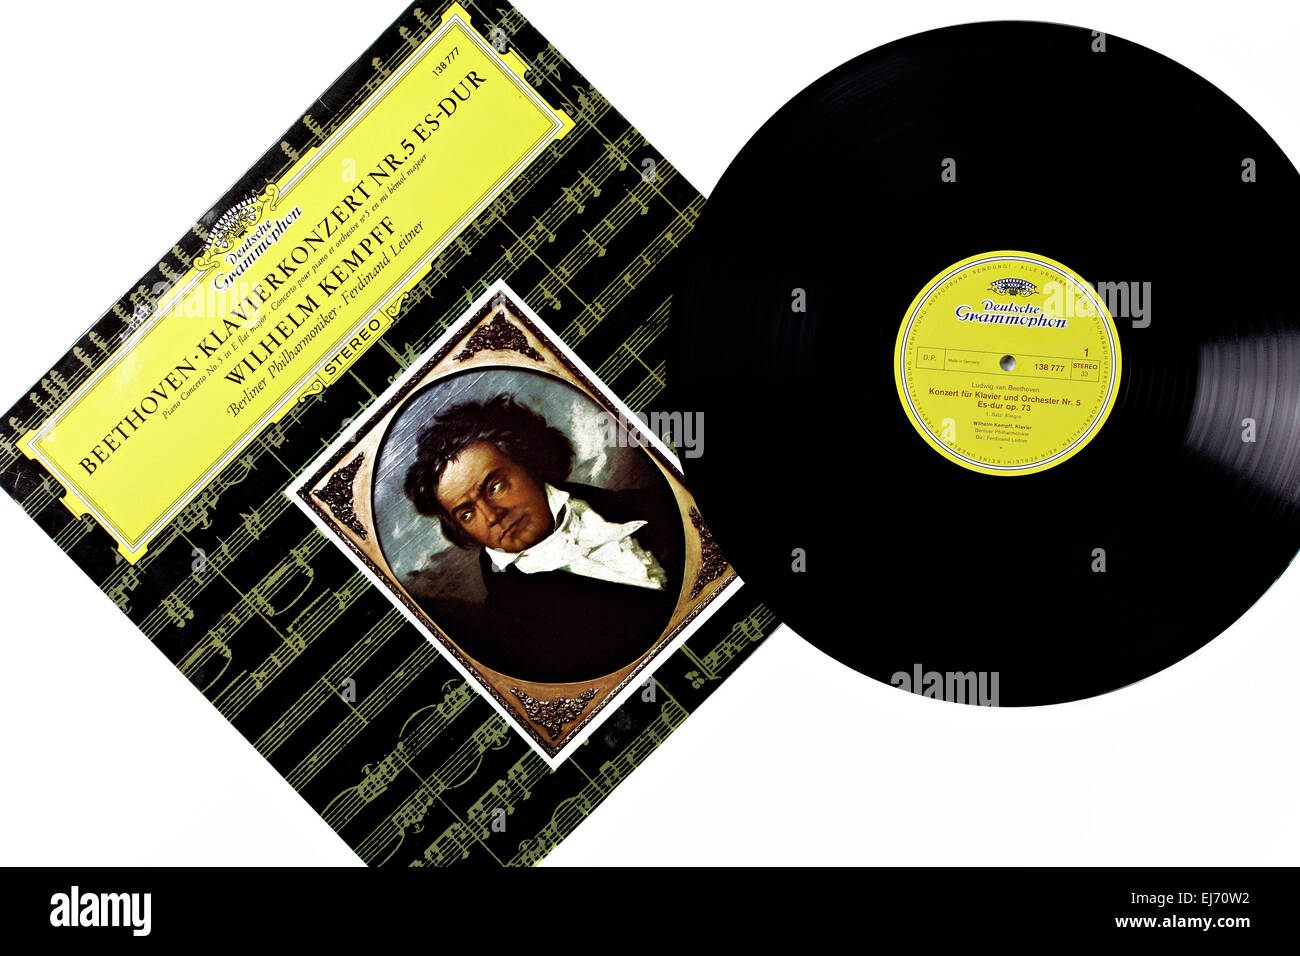 Deutsche Grammophon. Beethoven nr: 5 cover and 12" Long Play vinyl record  Stock Photo - Alamy